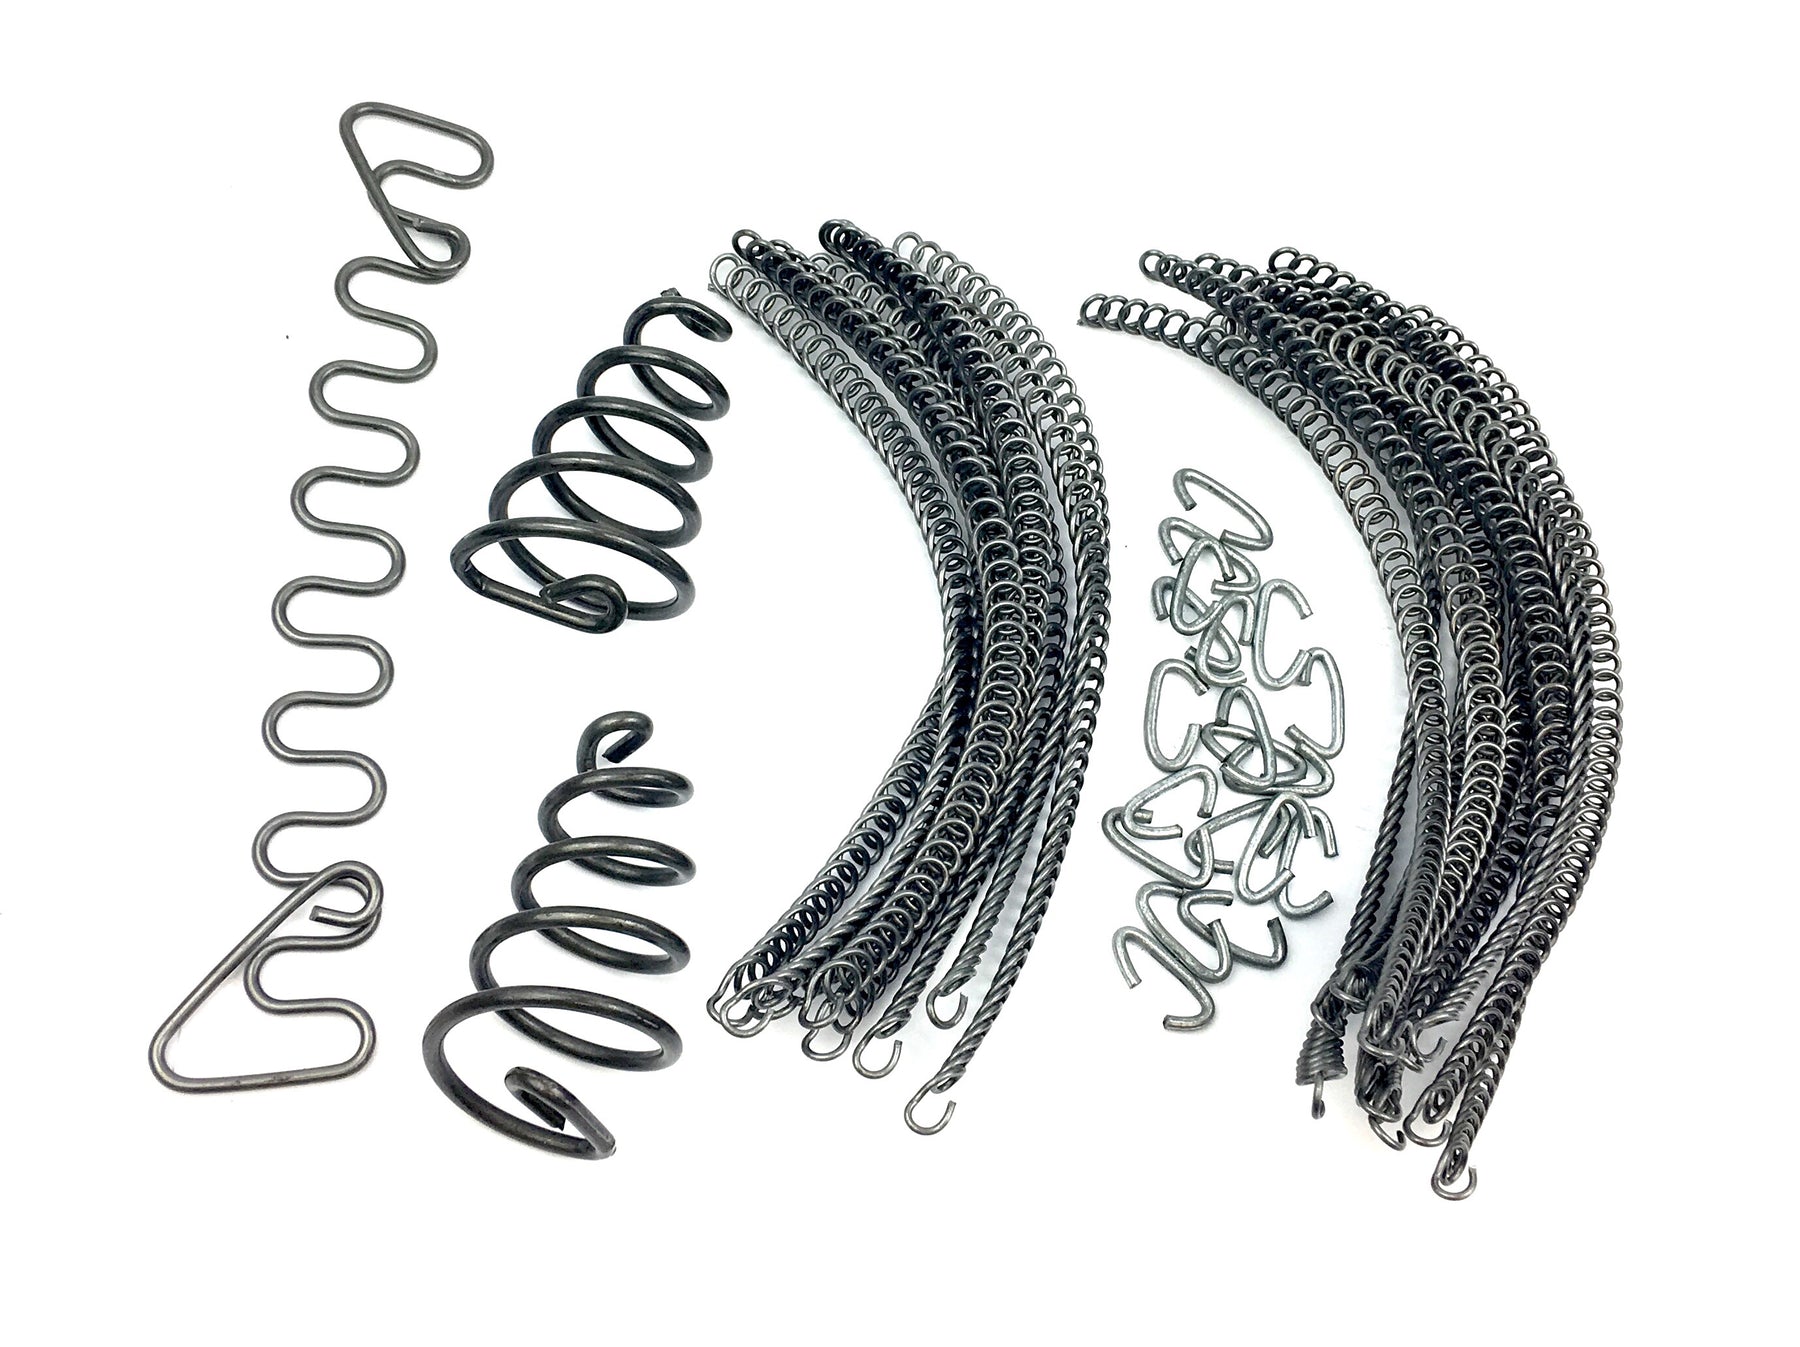 Vespa - Seat Spring Replacement Set - For Dual Seats